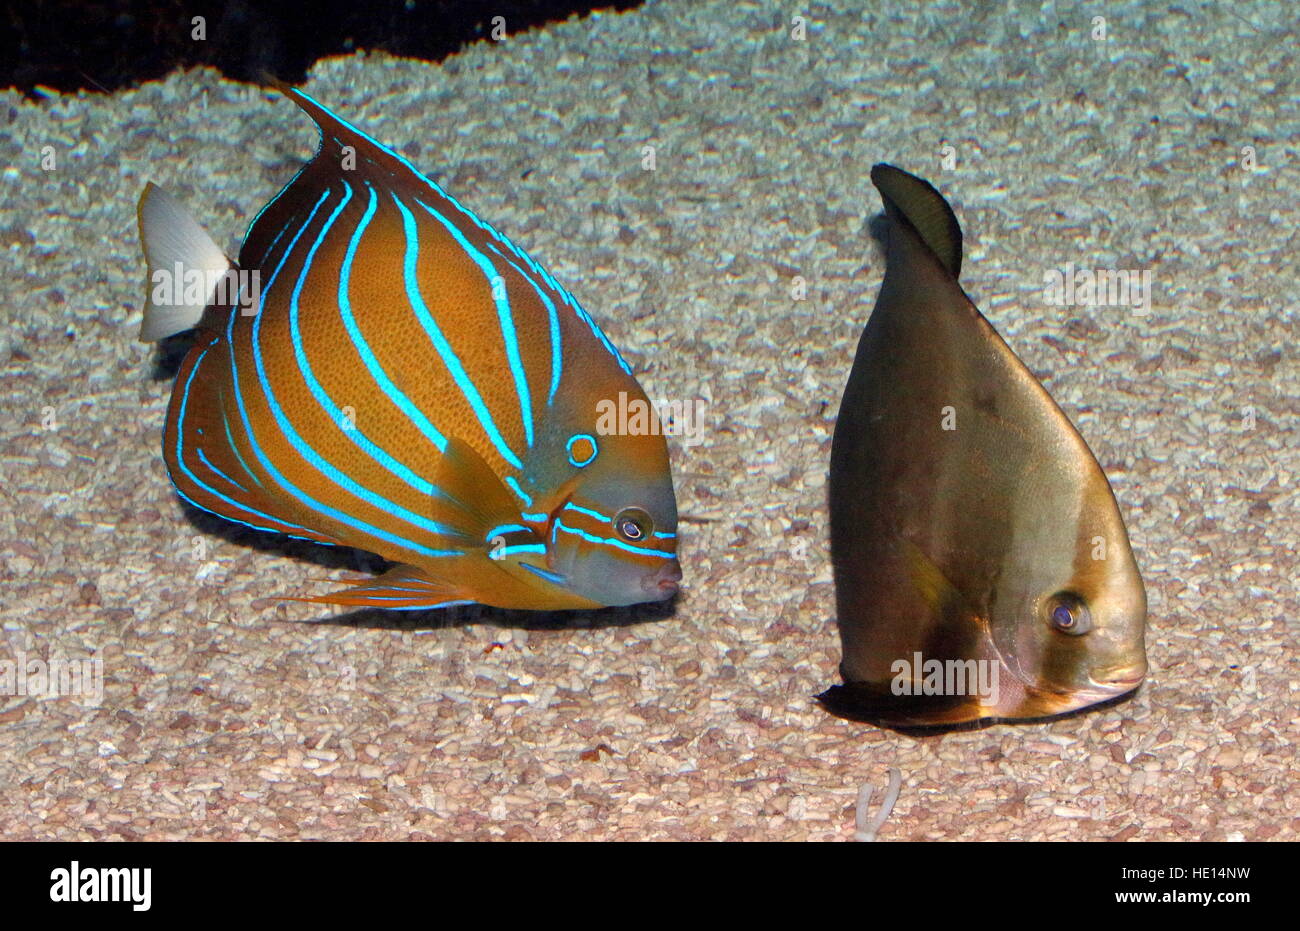 Indo-Pacific Blue ring Angelfish (Pomacanthus annularis) together with an orbicular batfish (Platax orbicularis) Stock Photo